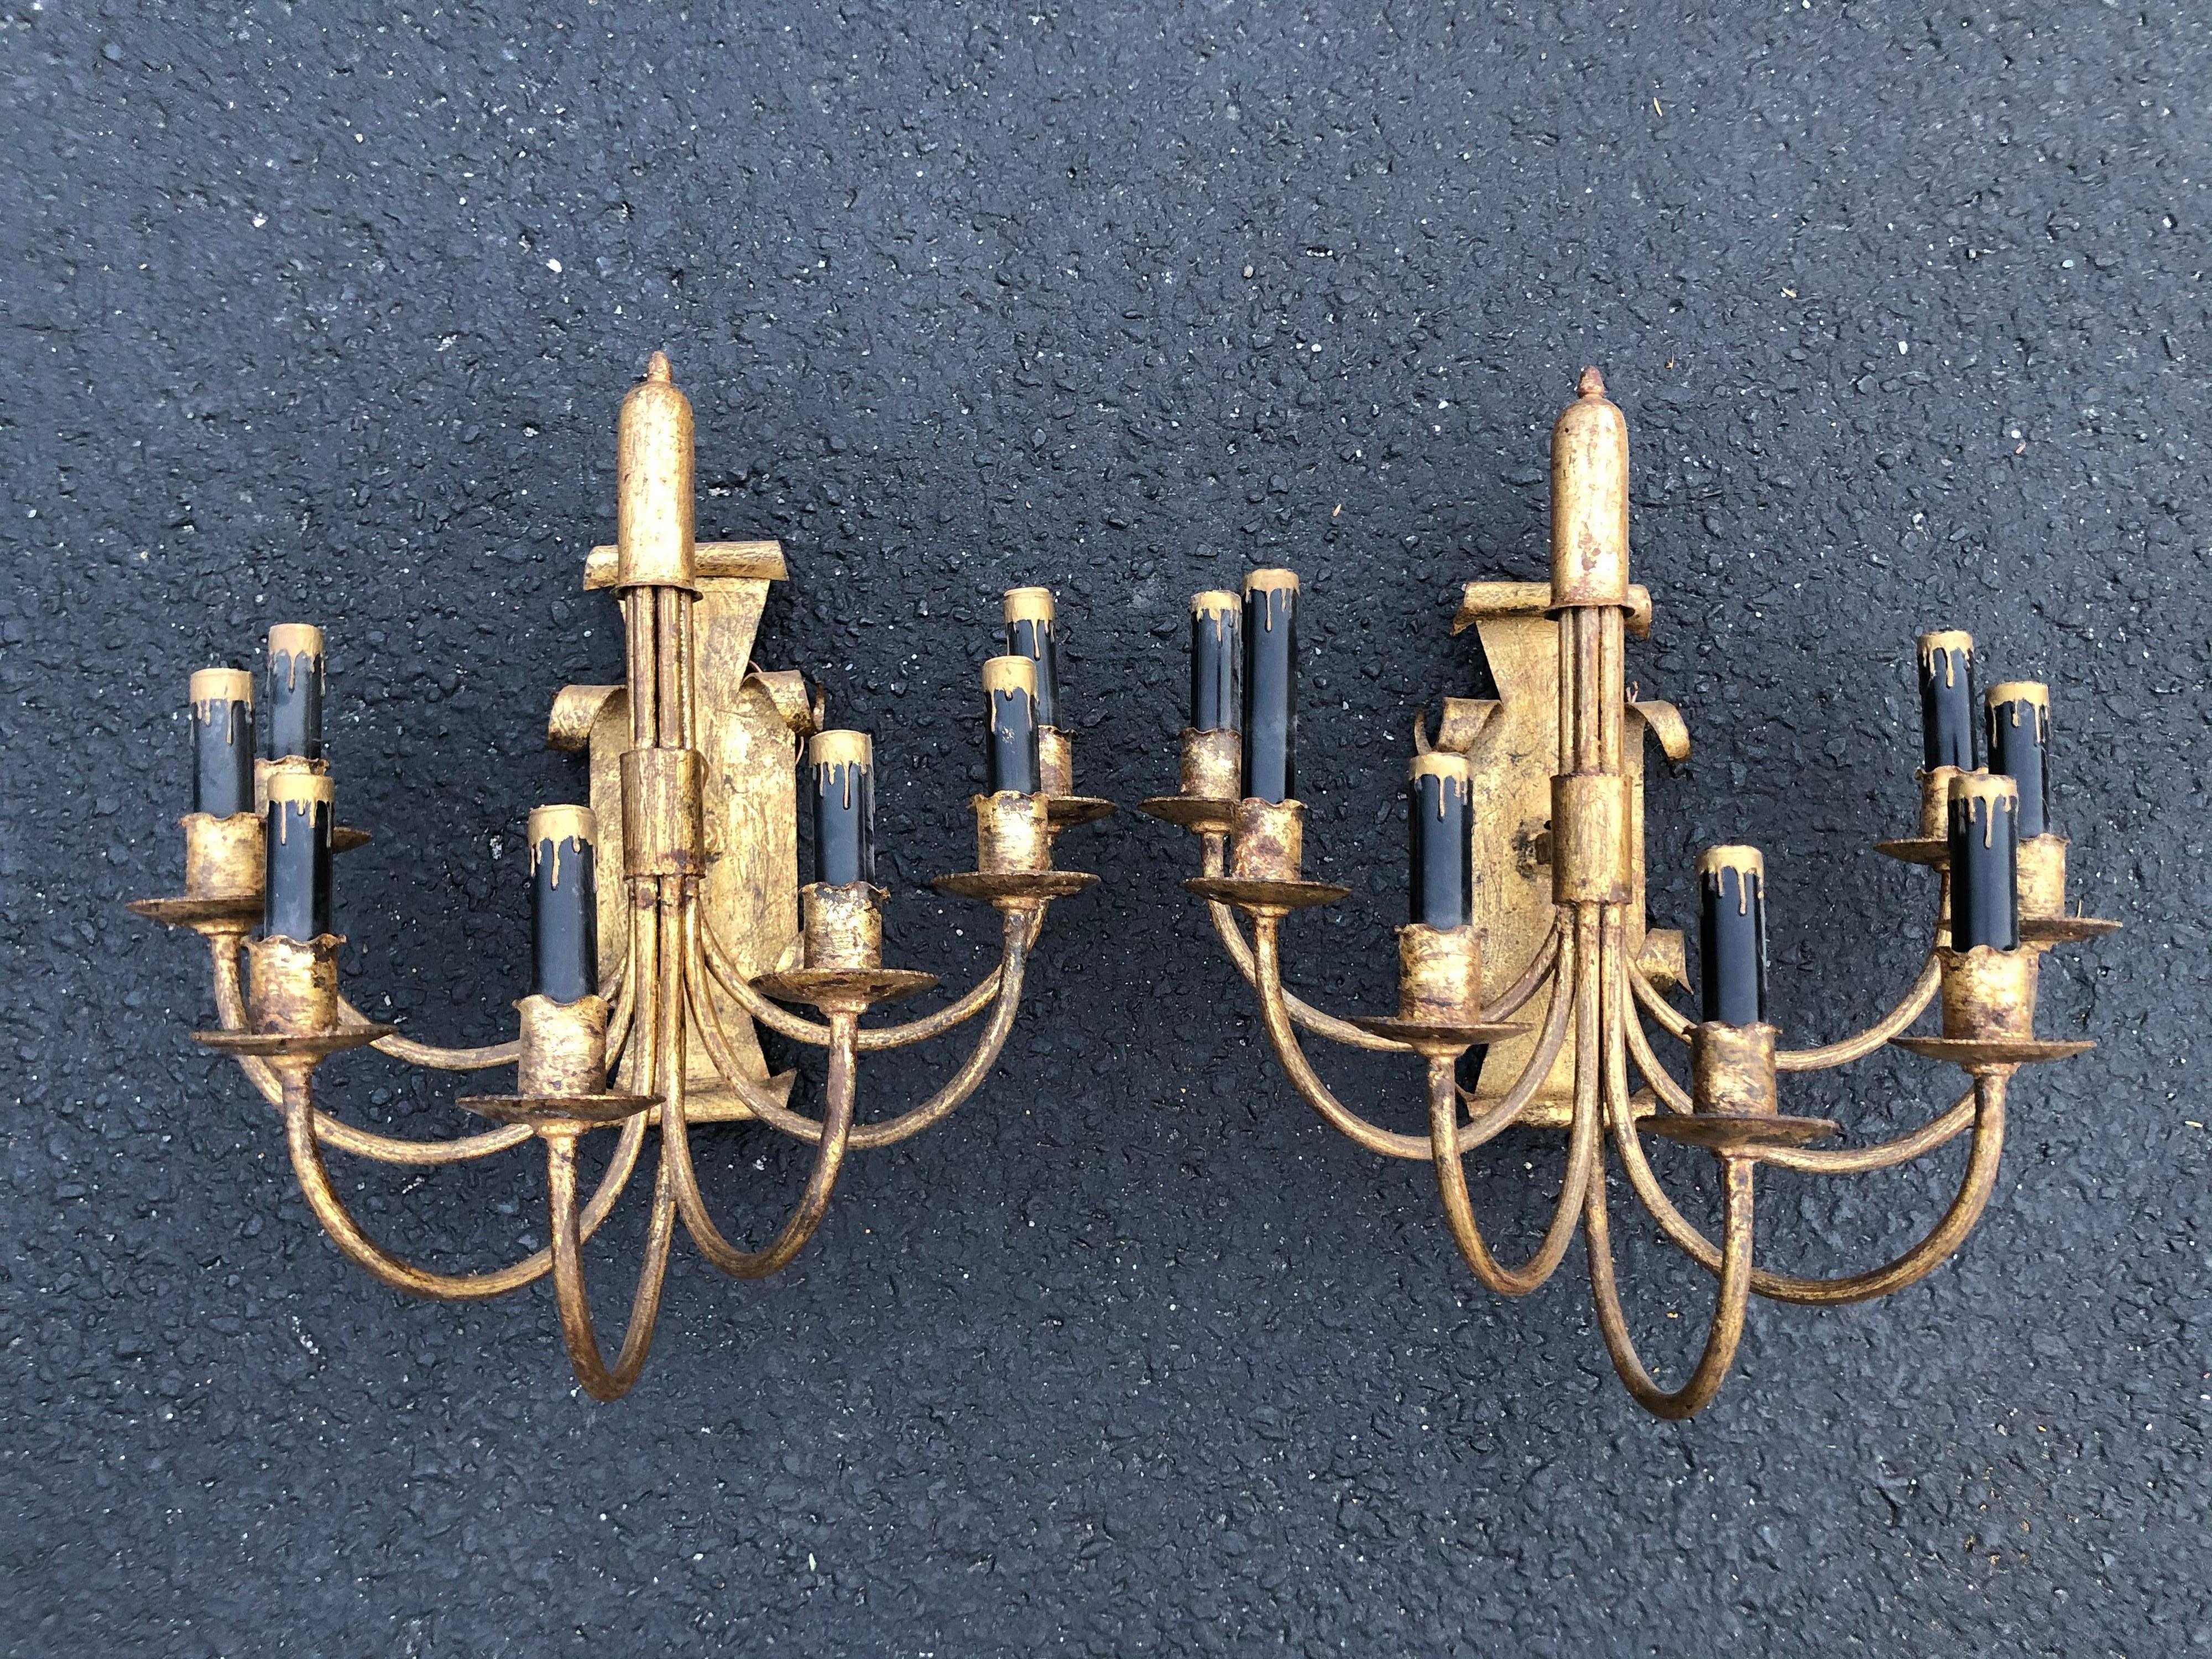 Pair of gilt iron sconces with black candle covers.( Price is for thte pair of 2). Extremely elegant and sophisticated pair of Hollywood Regency sconces. Newly wired.